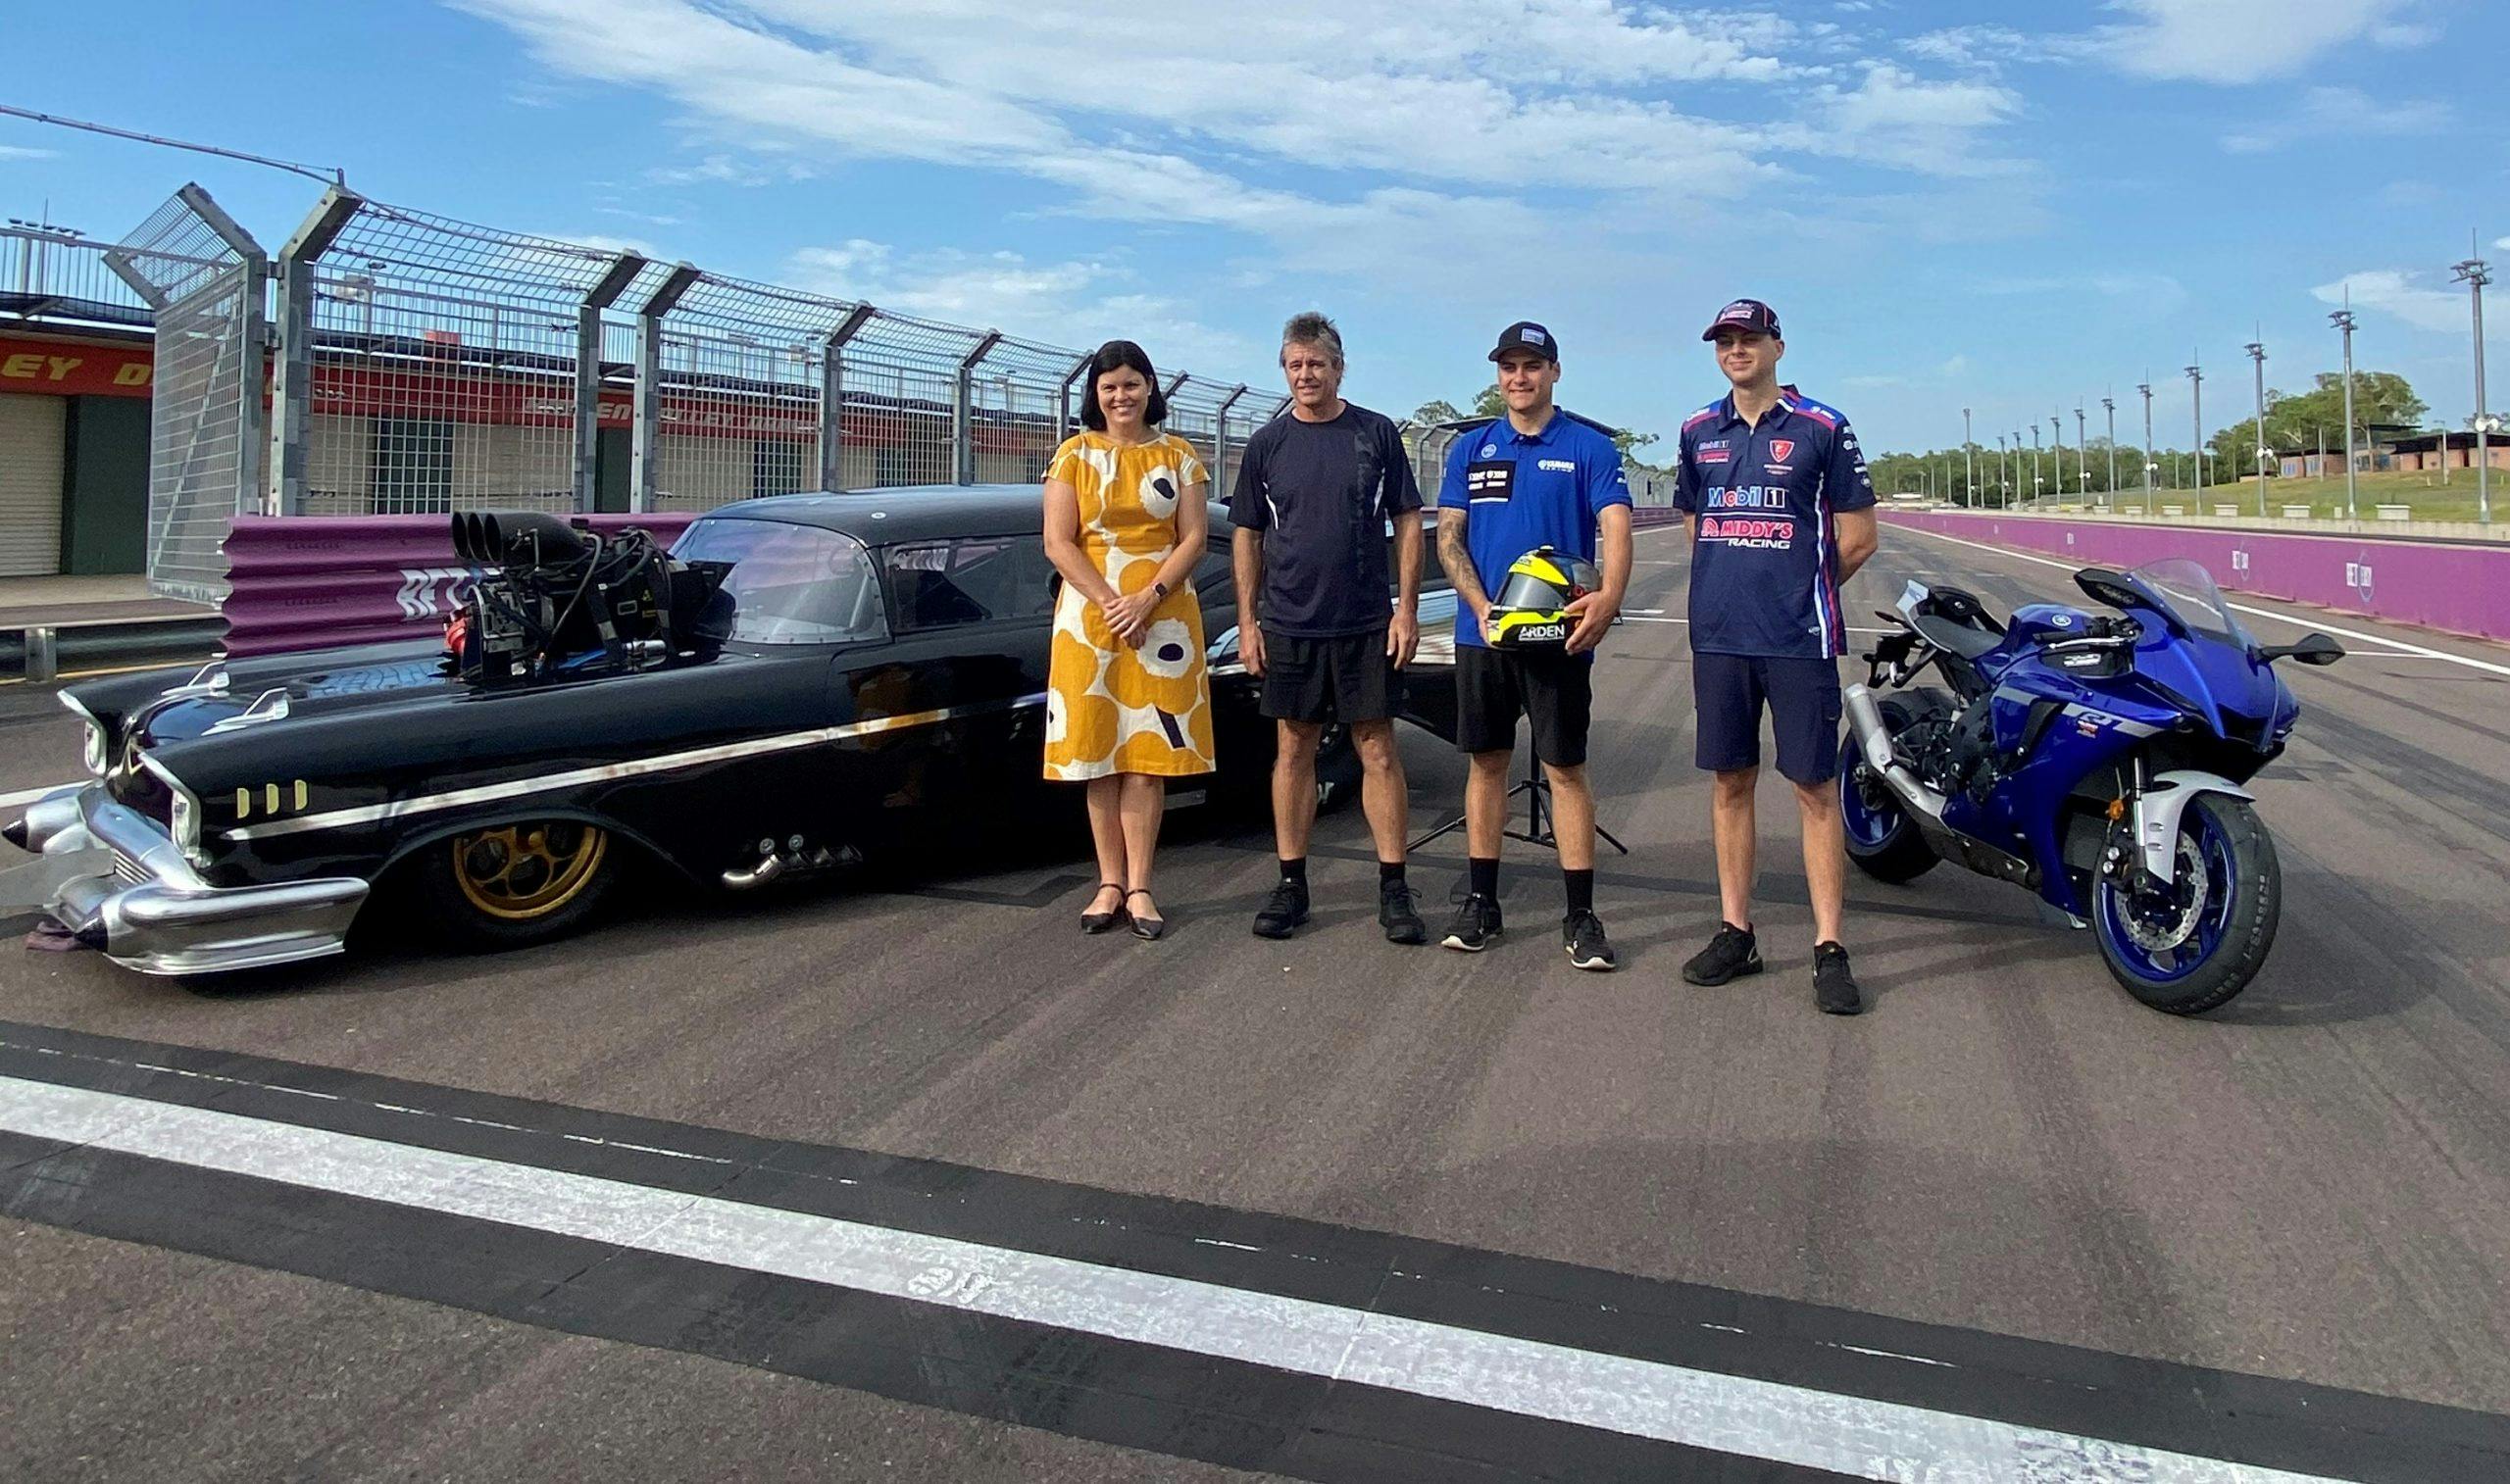 Group of people standing in front of a drag car and Superbike